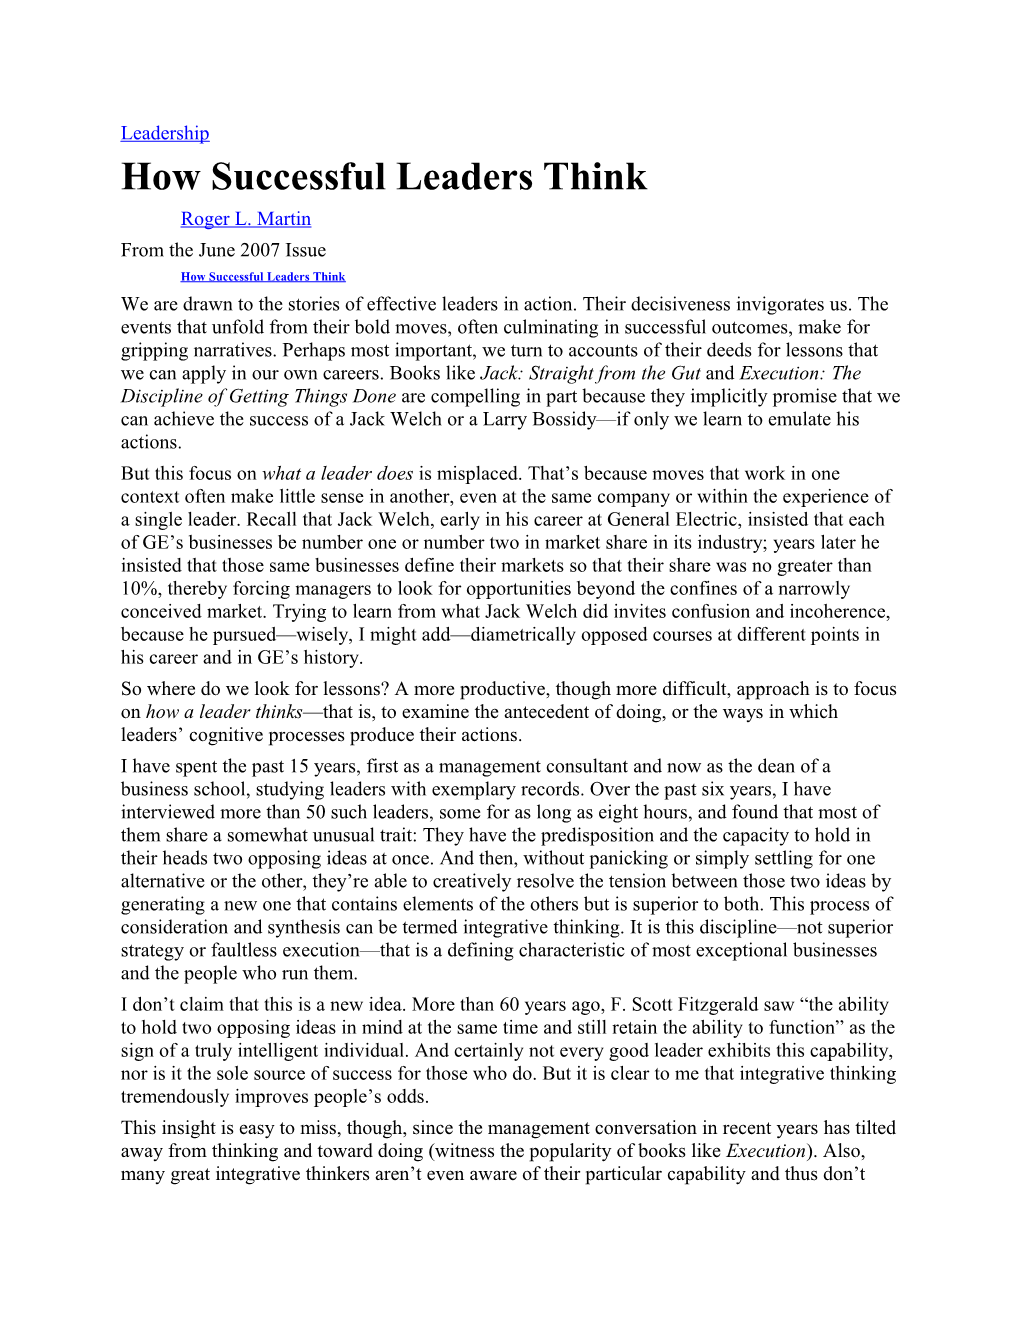 How Successful Leaders Think